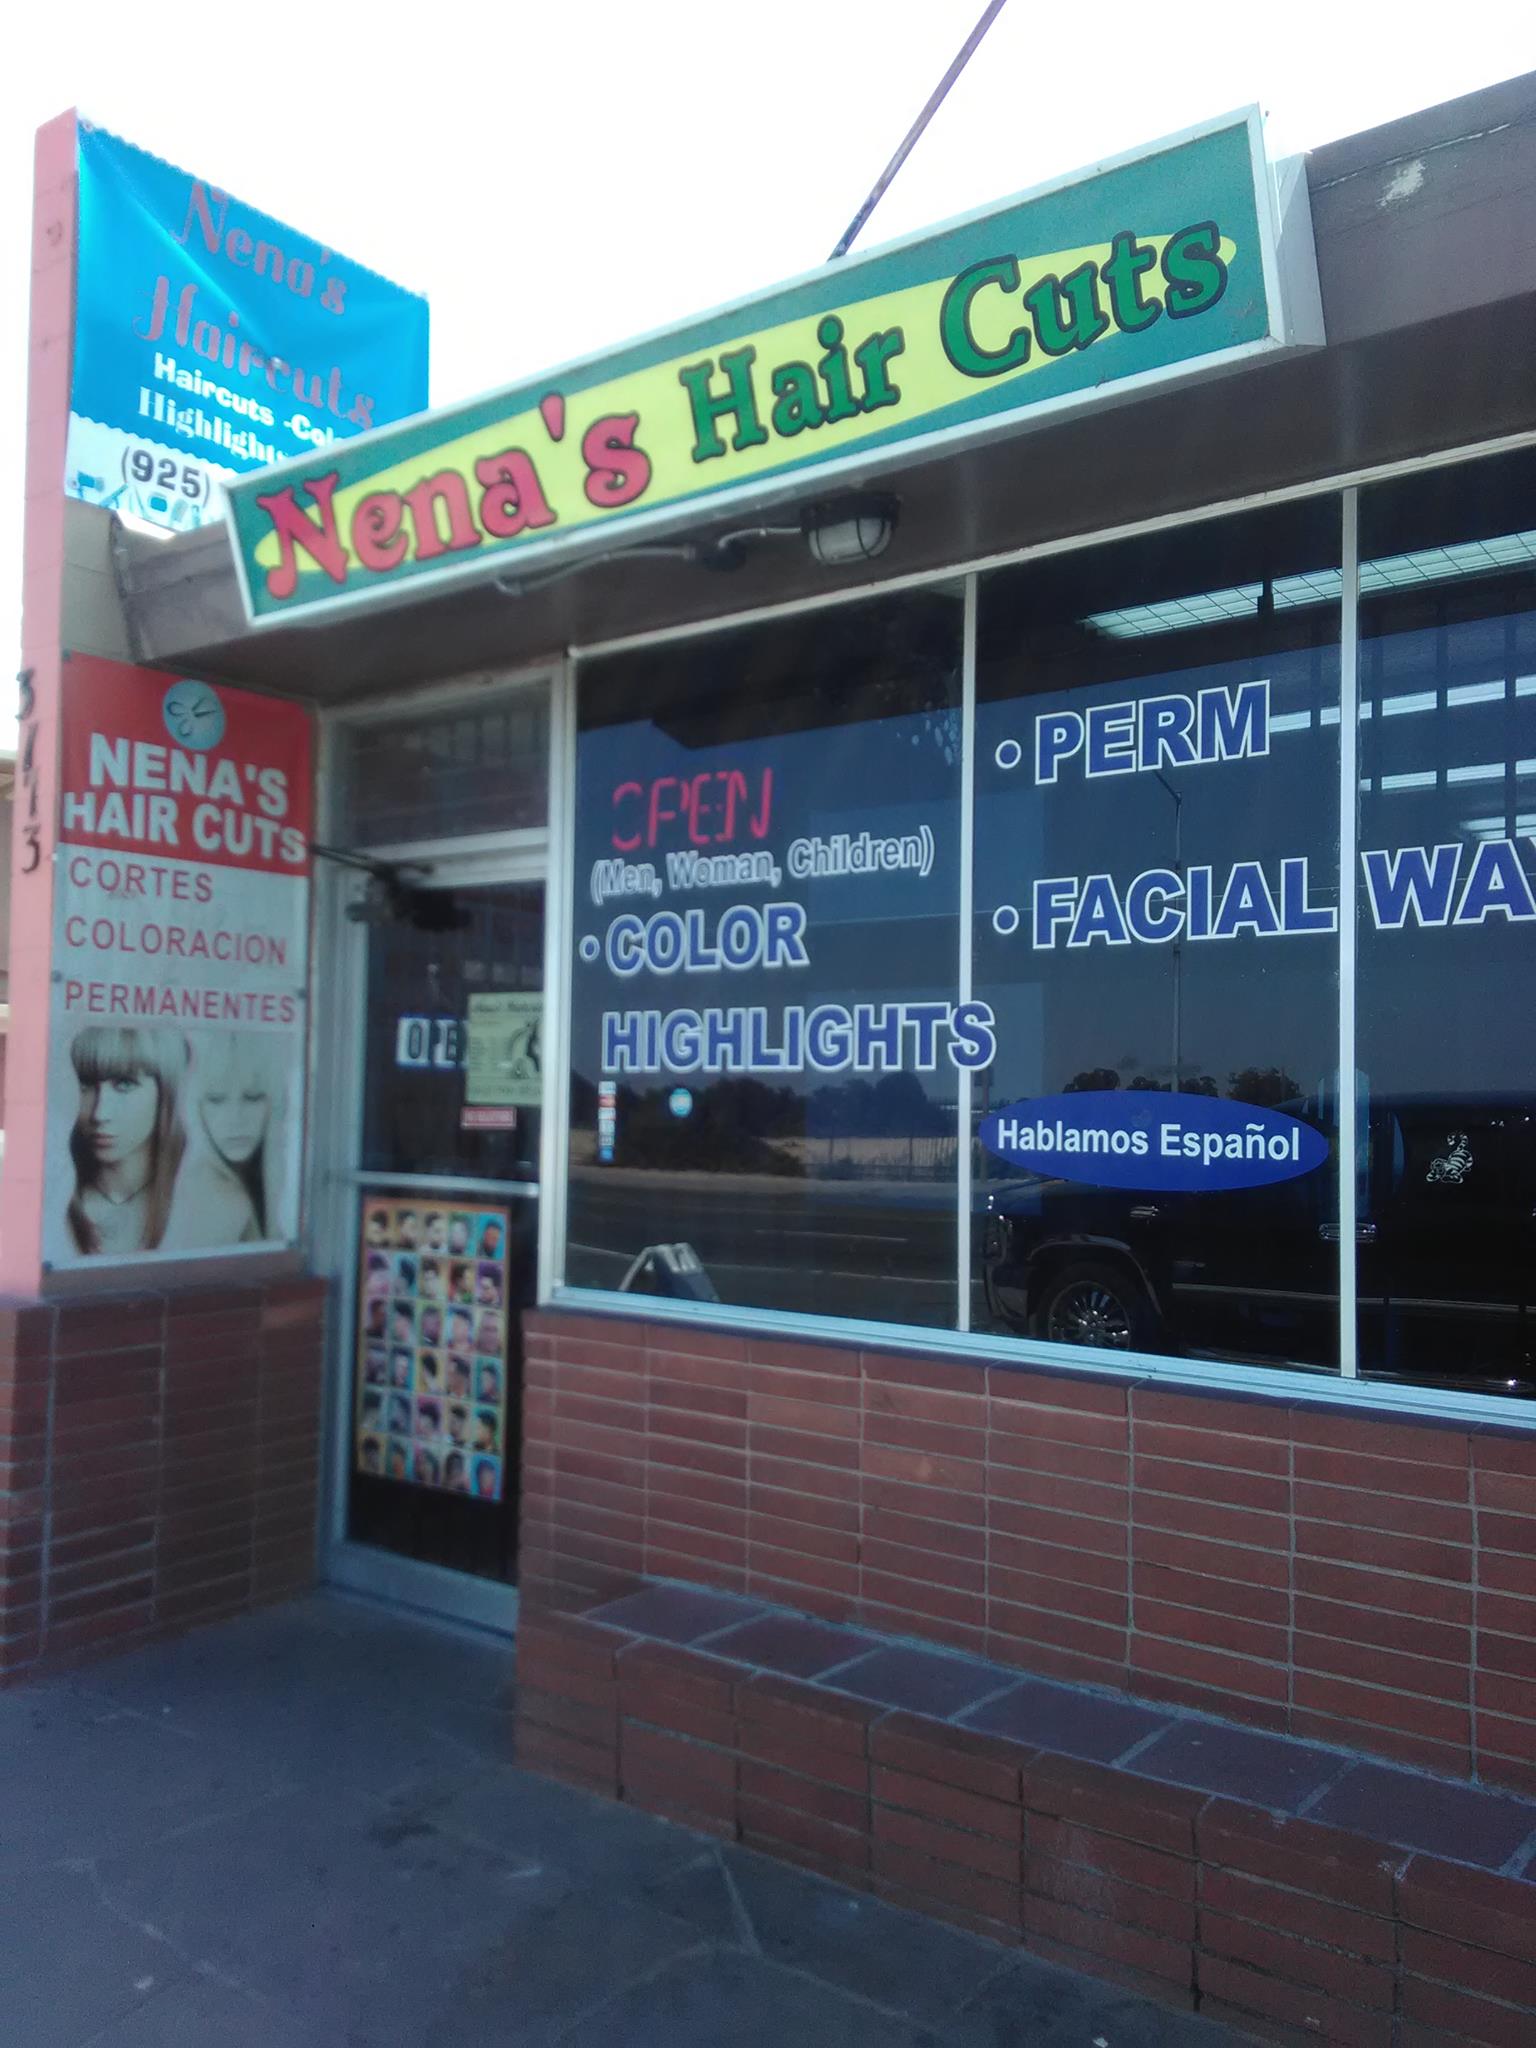 Nena's Haircuts 3173 Willow Pass Rd, Bay Point California 94565